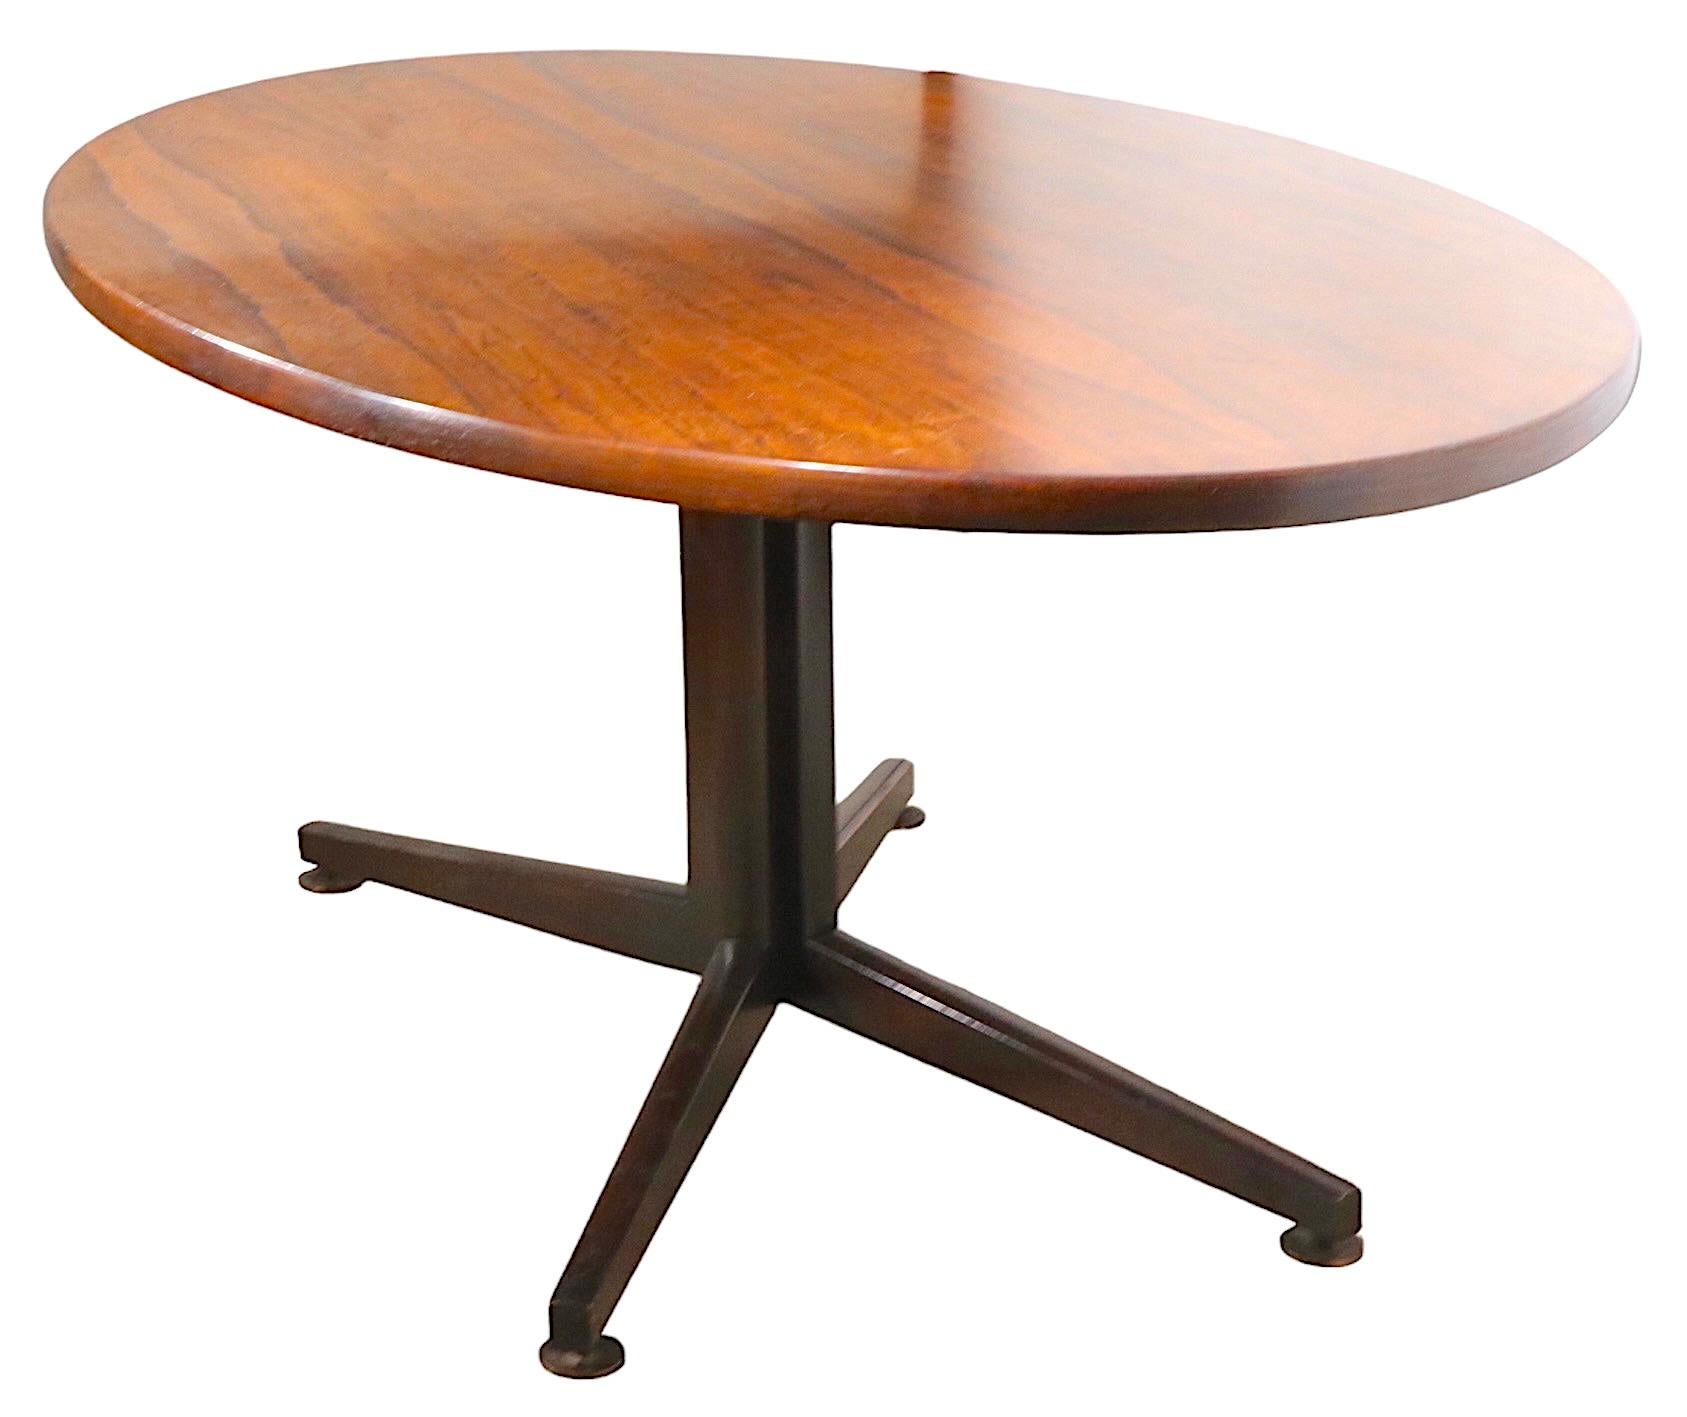 Dunbar Wormley Dining Table in Rosewood Model 936 C 1950/1960's For Sale 3